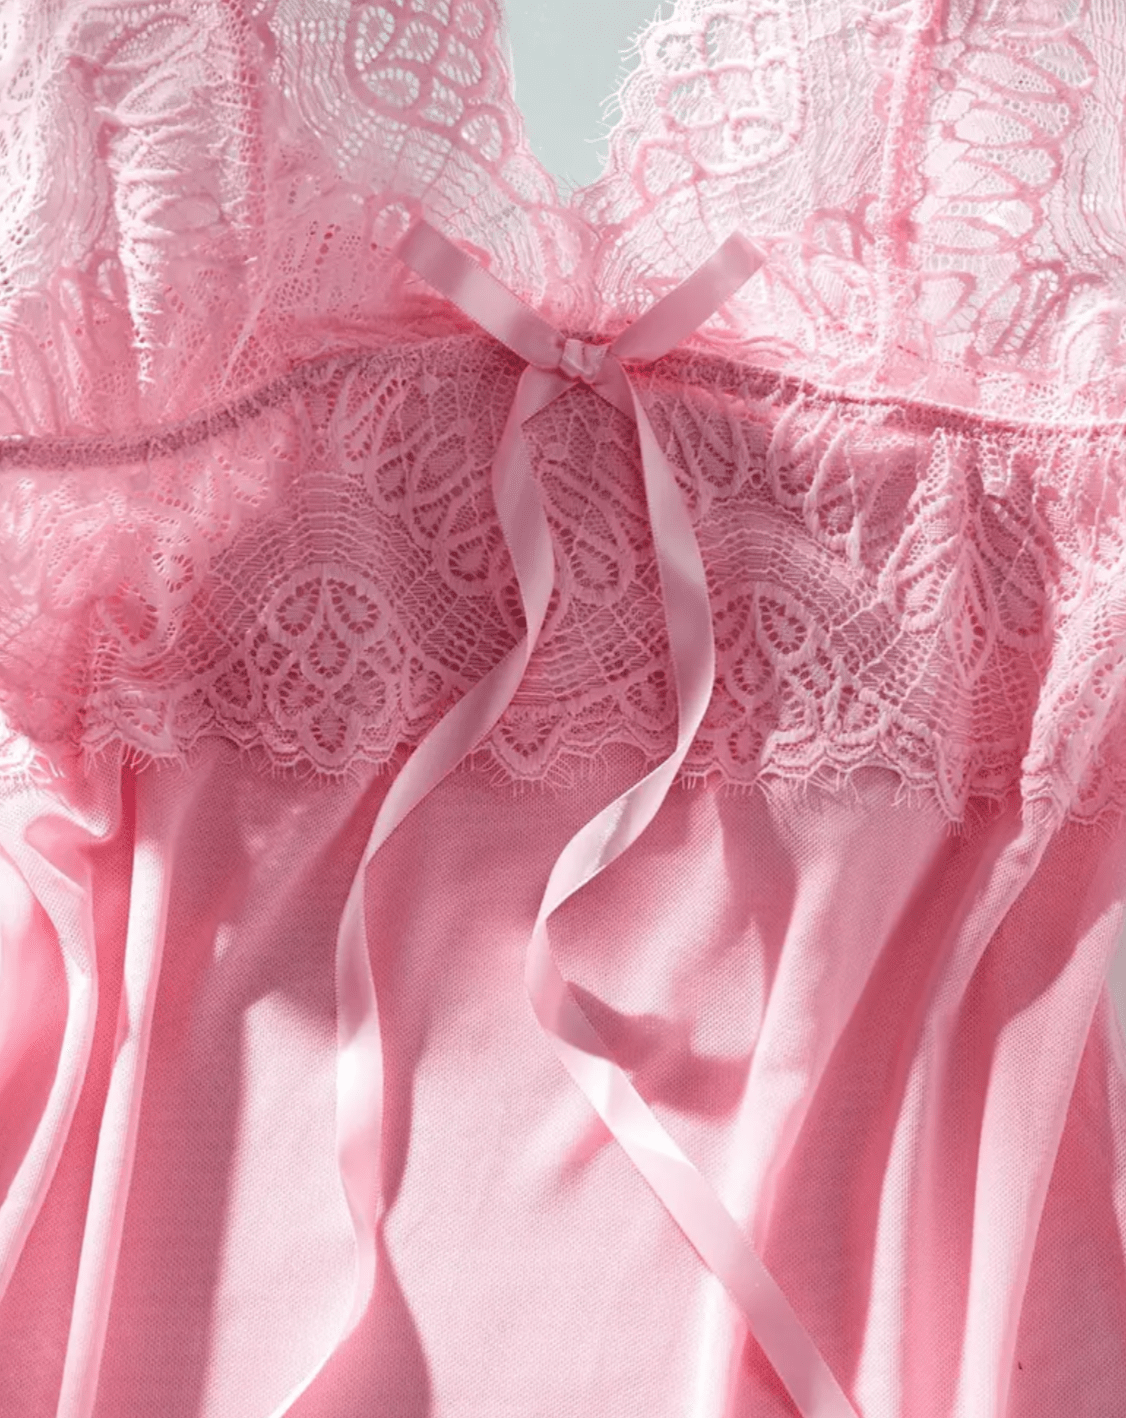 pink lace lingerie negligees